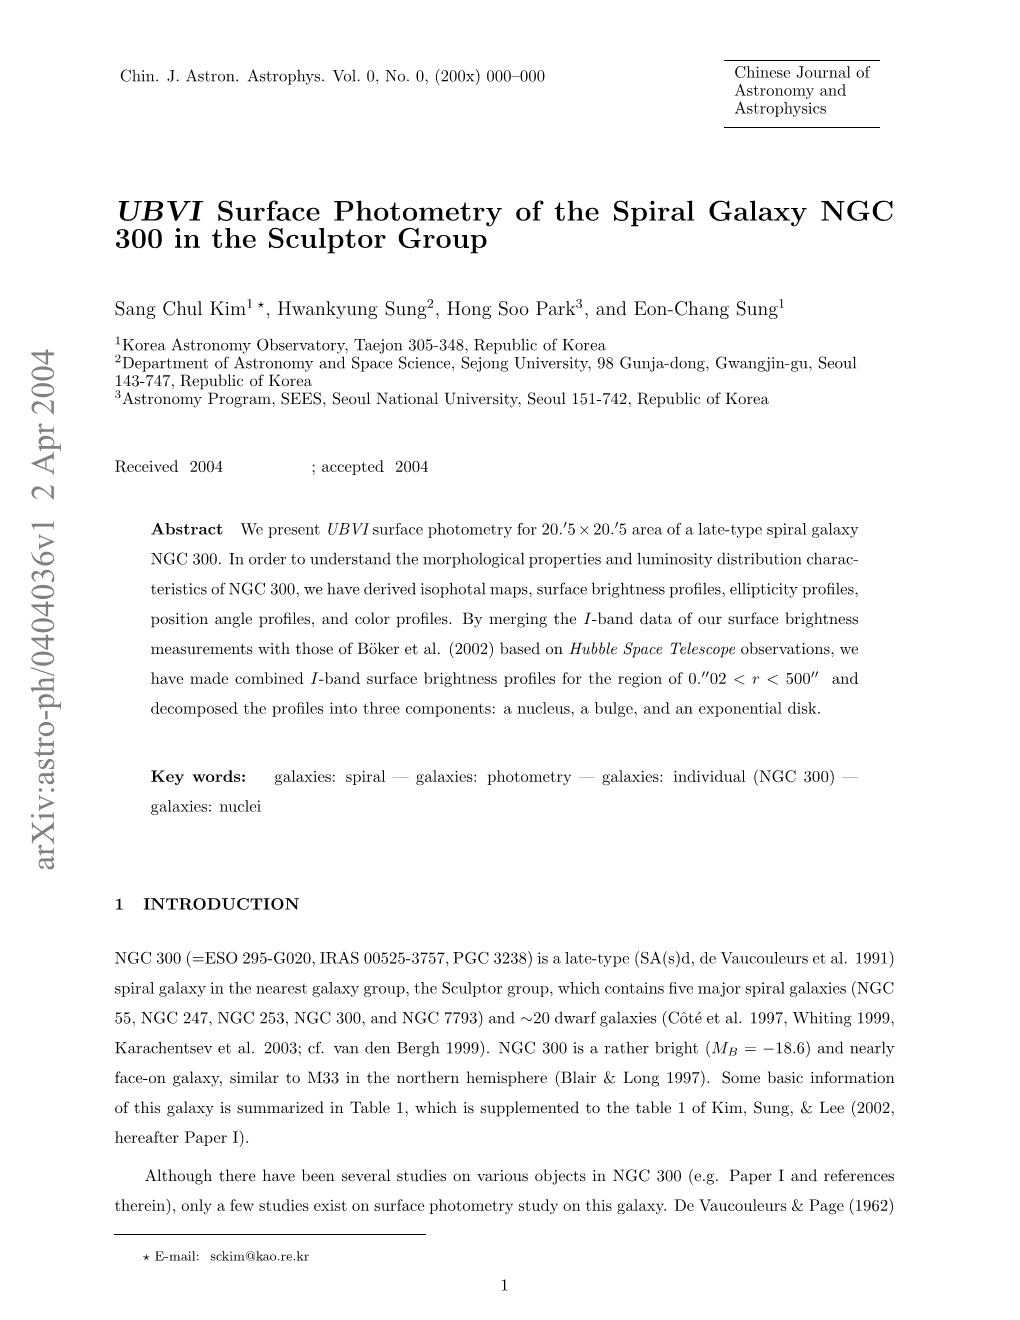 UBVI Surface Photometry of the Spiral Galaxy NGC 300 in The